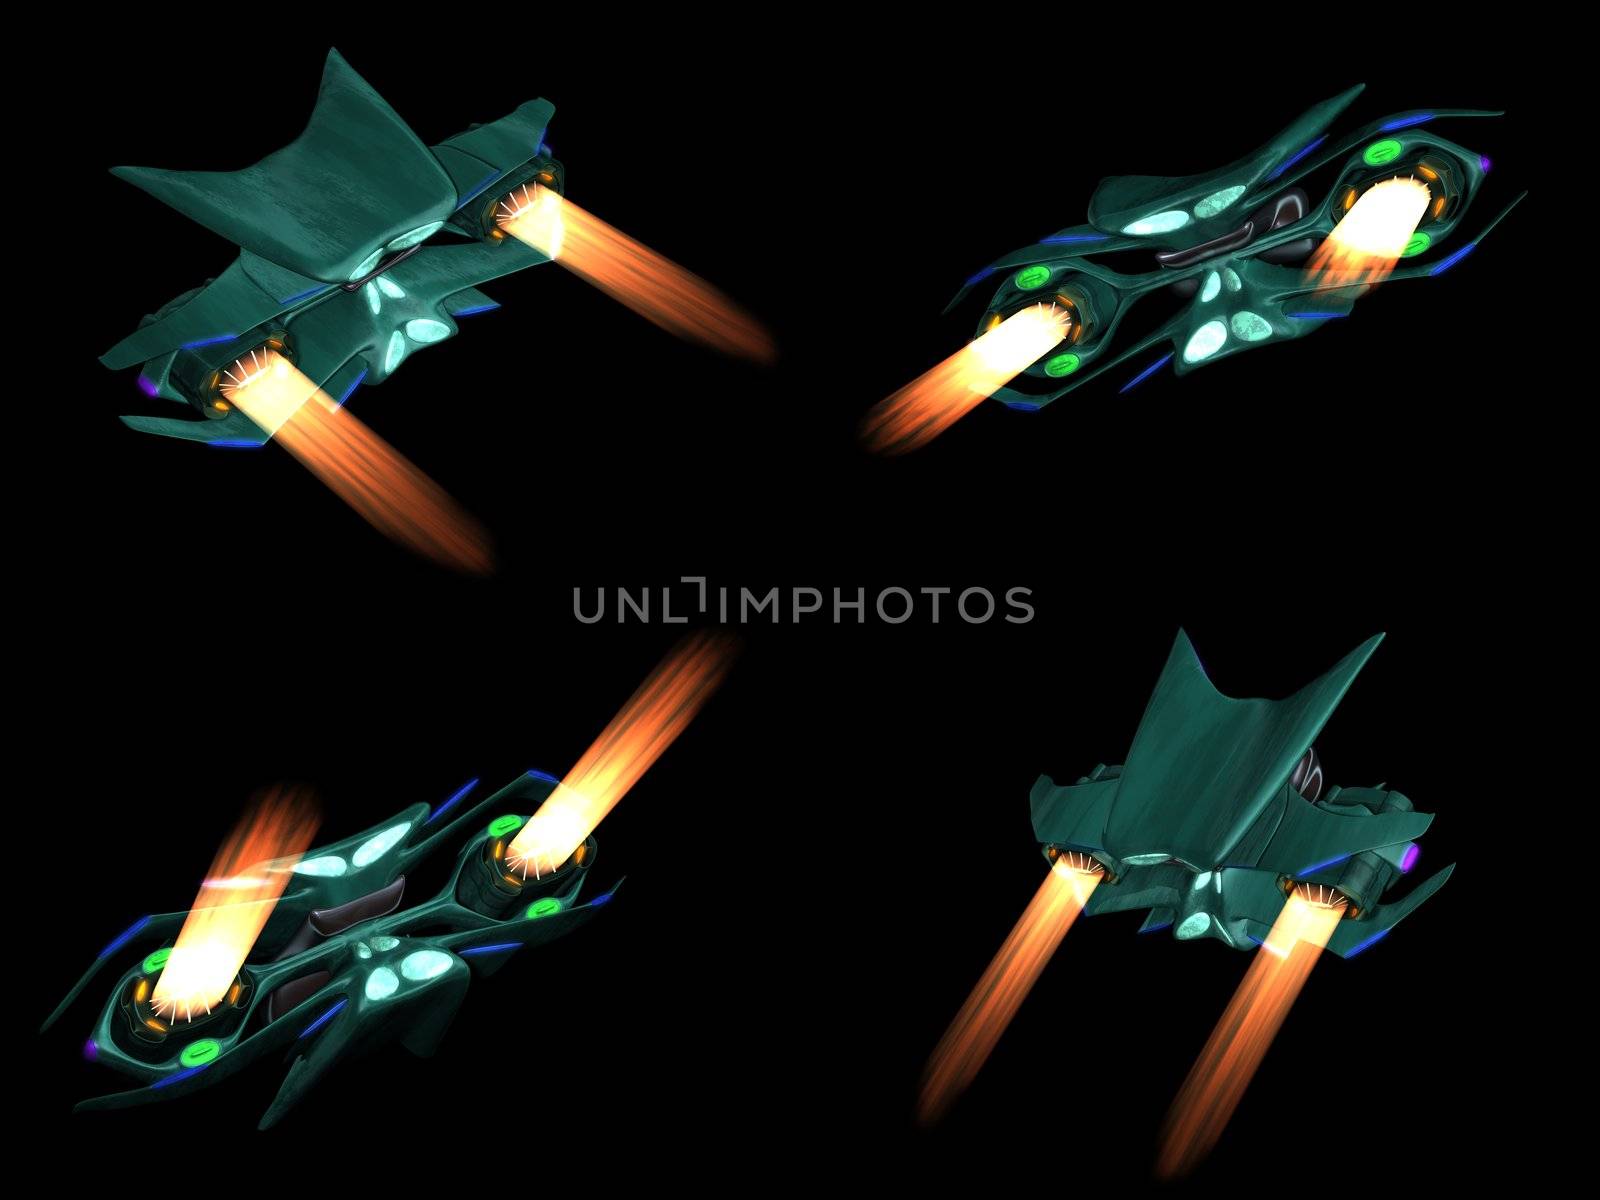 Four back views of an alien space ship by shkyo30